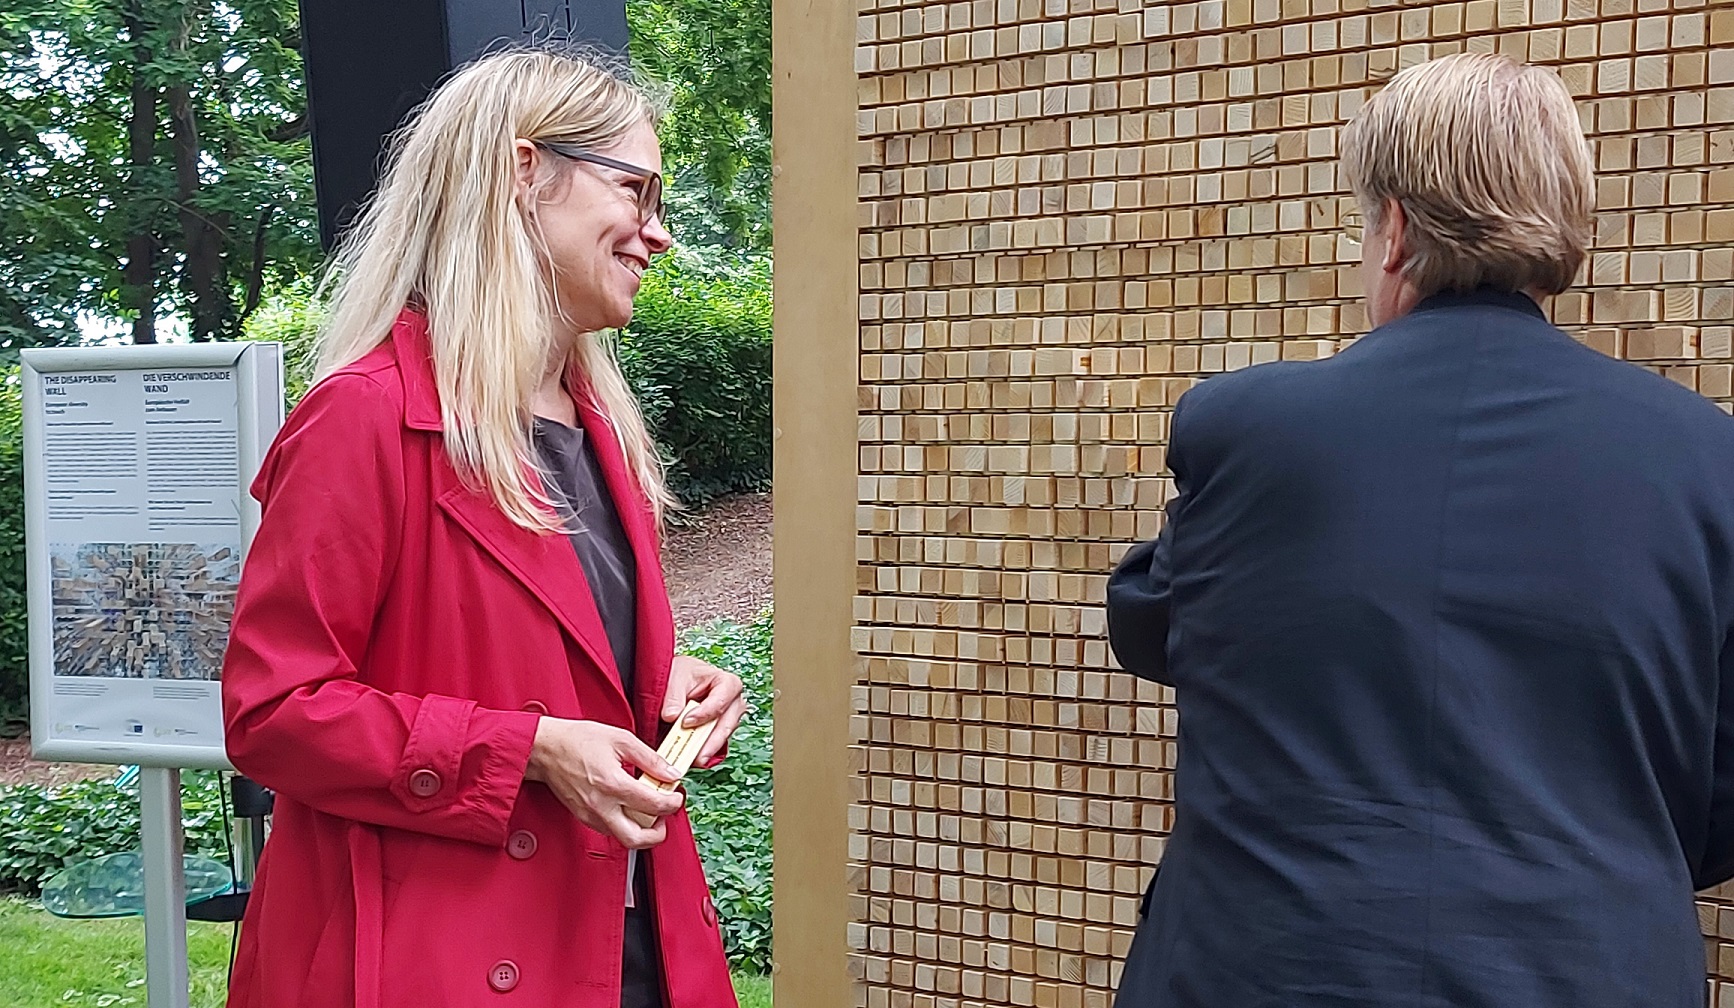 Goethe Institute director Elke Kaschl Mohni and German ambassador Martin Kotthaus in front of the Disappearing Wall in the Citizens’ Garden  